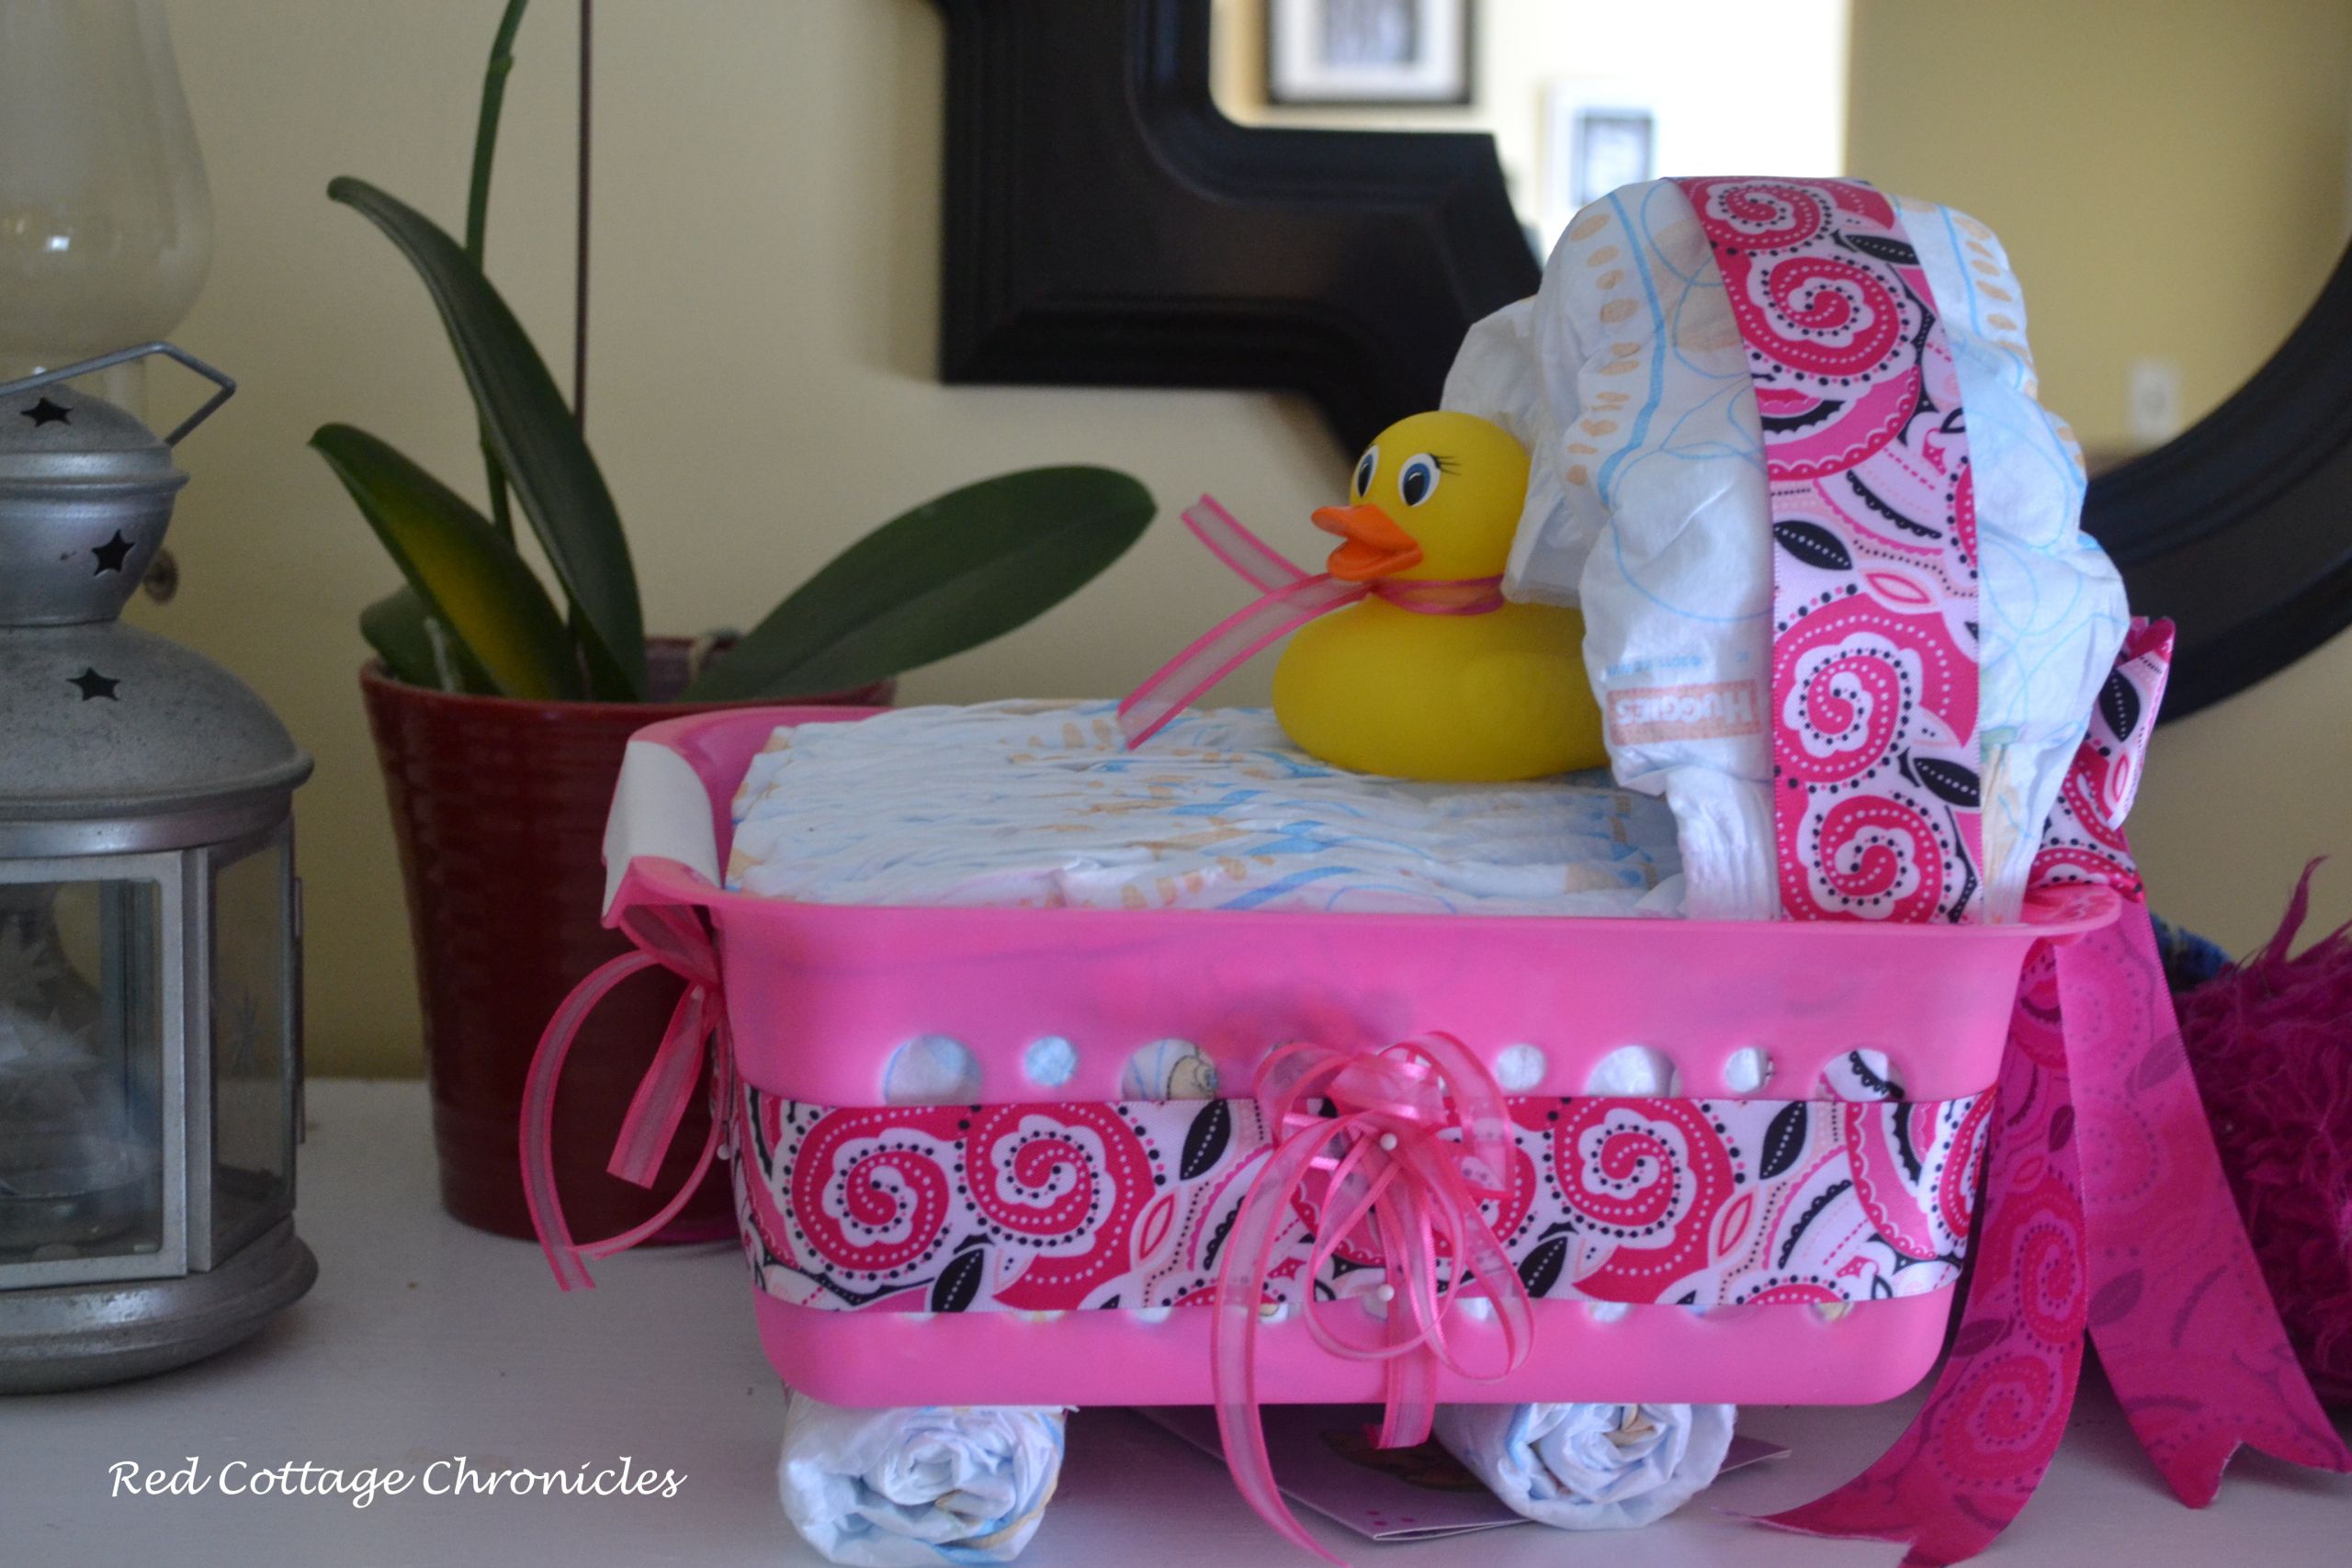 Gift Ideas For Baby Girls
 This Baby Shower Gift Idea is a practical t any new mom